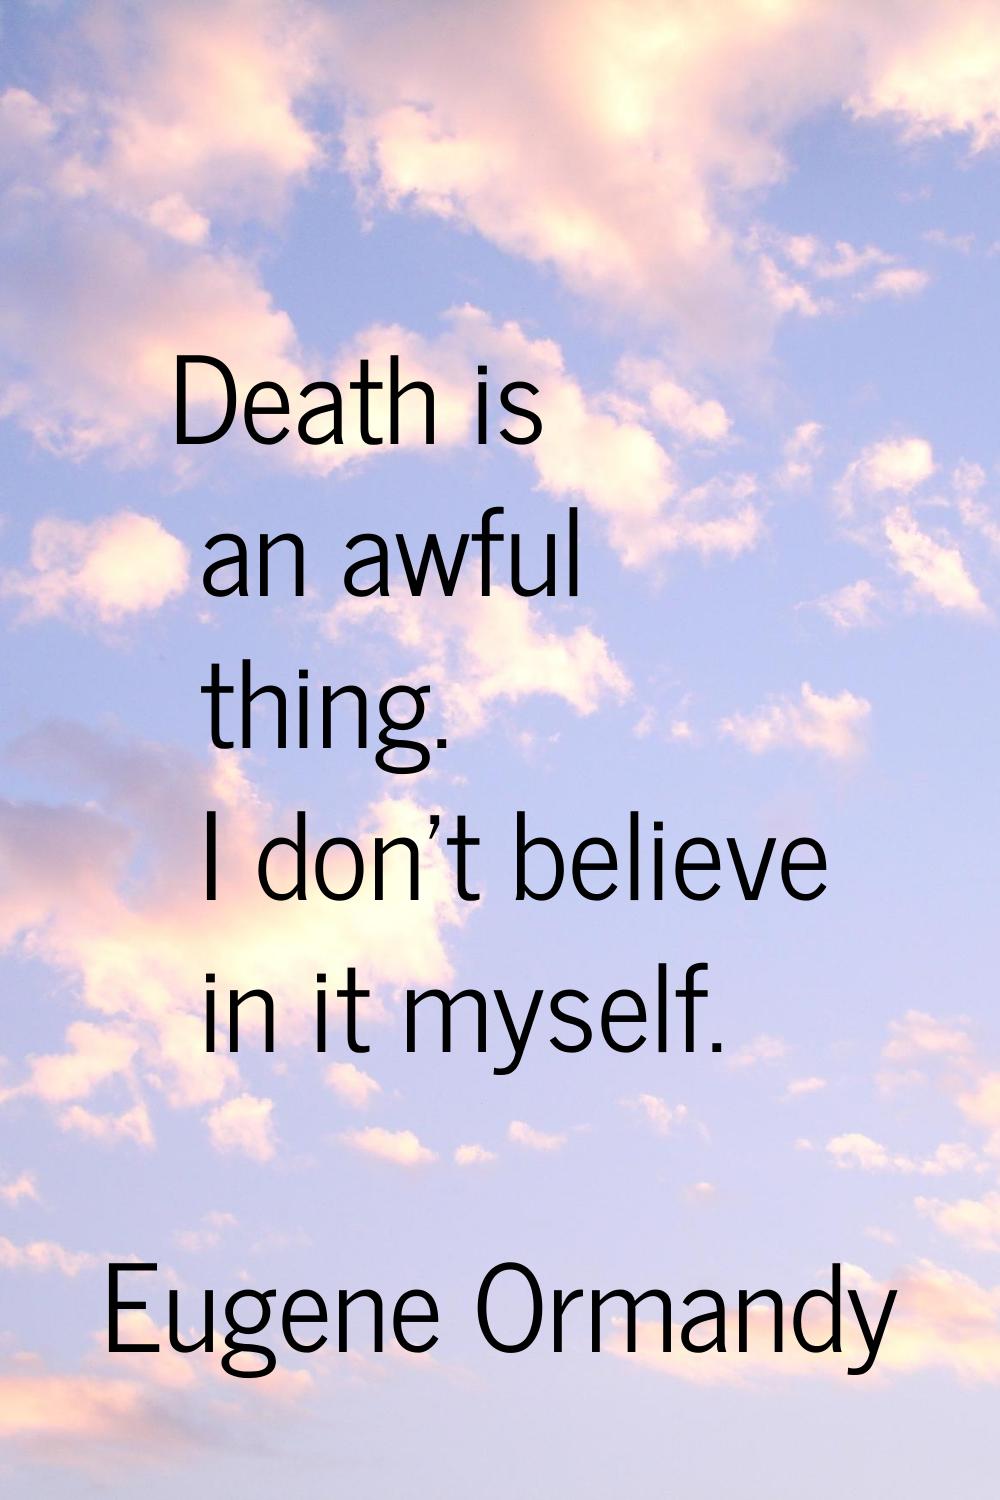 Death is an awful thing. I don't believe in it myself.